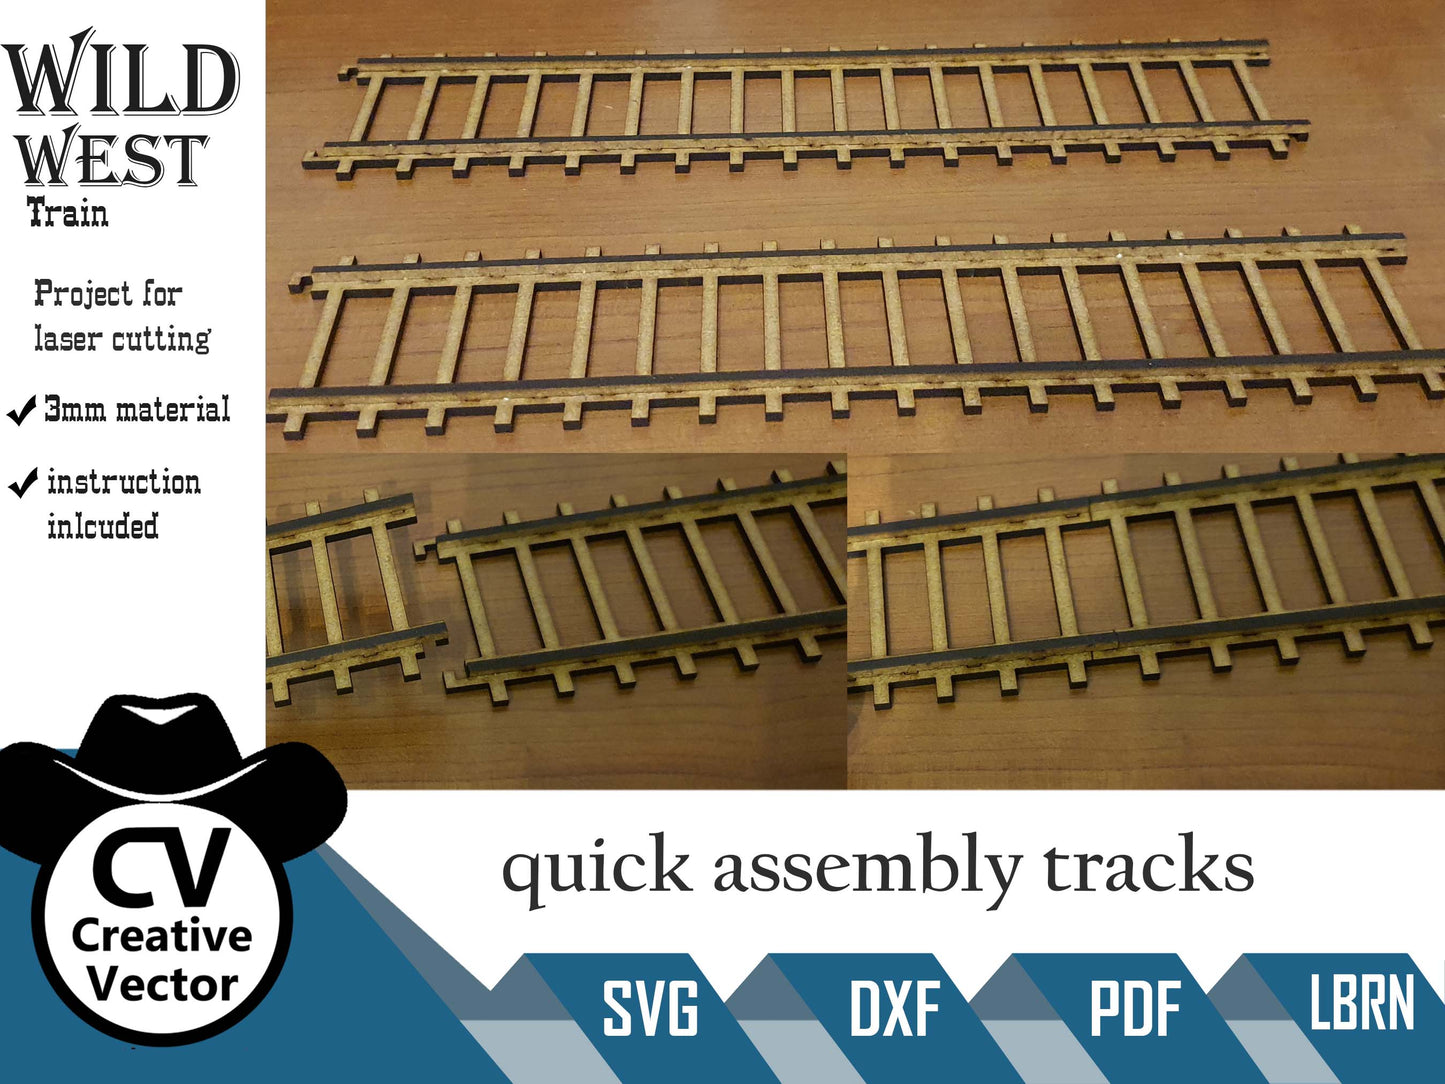 Wild West Passengers wagon + rails  in scale 28mm for Wargamers